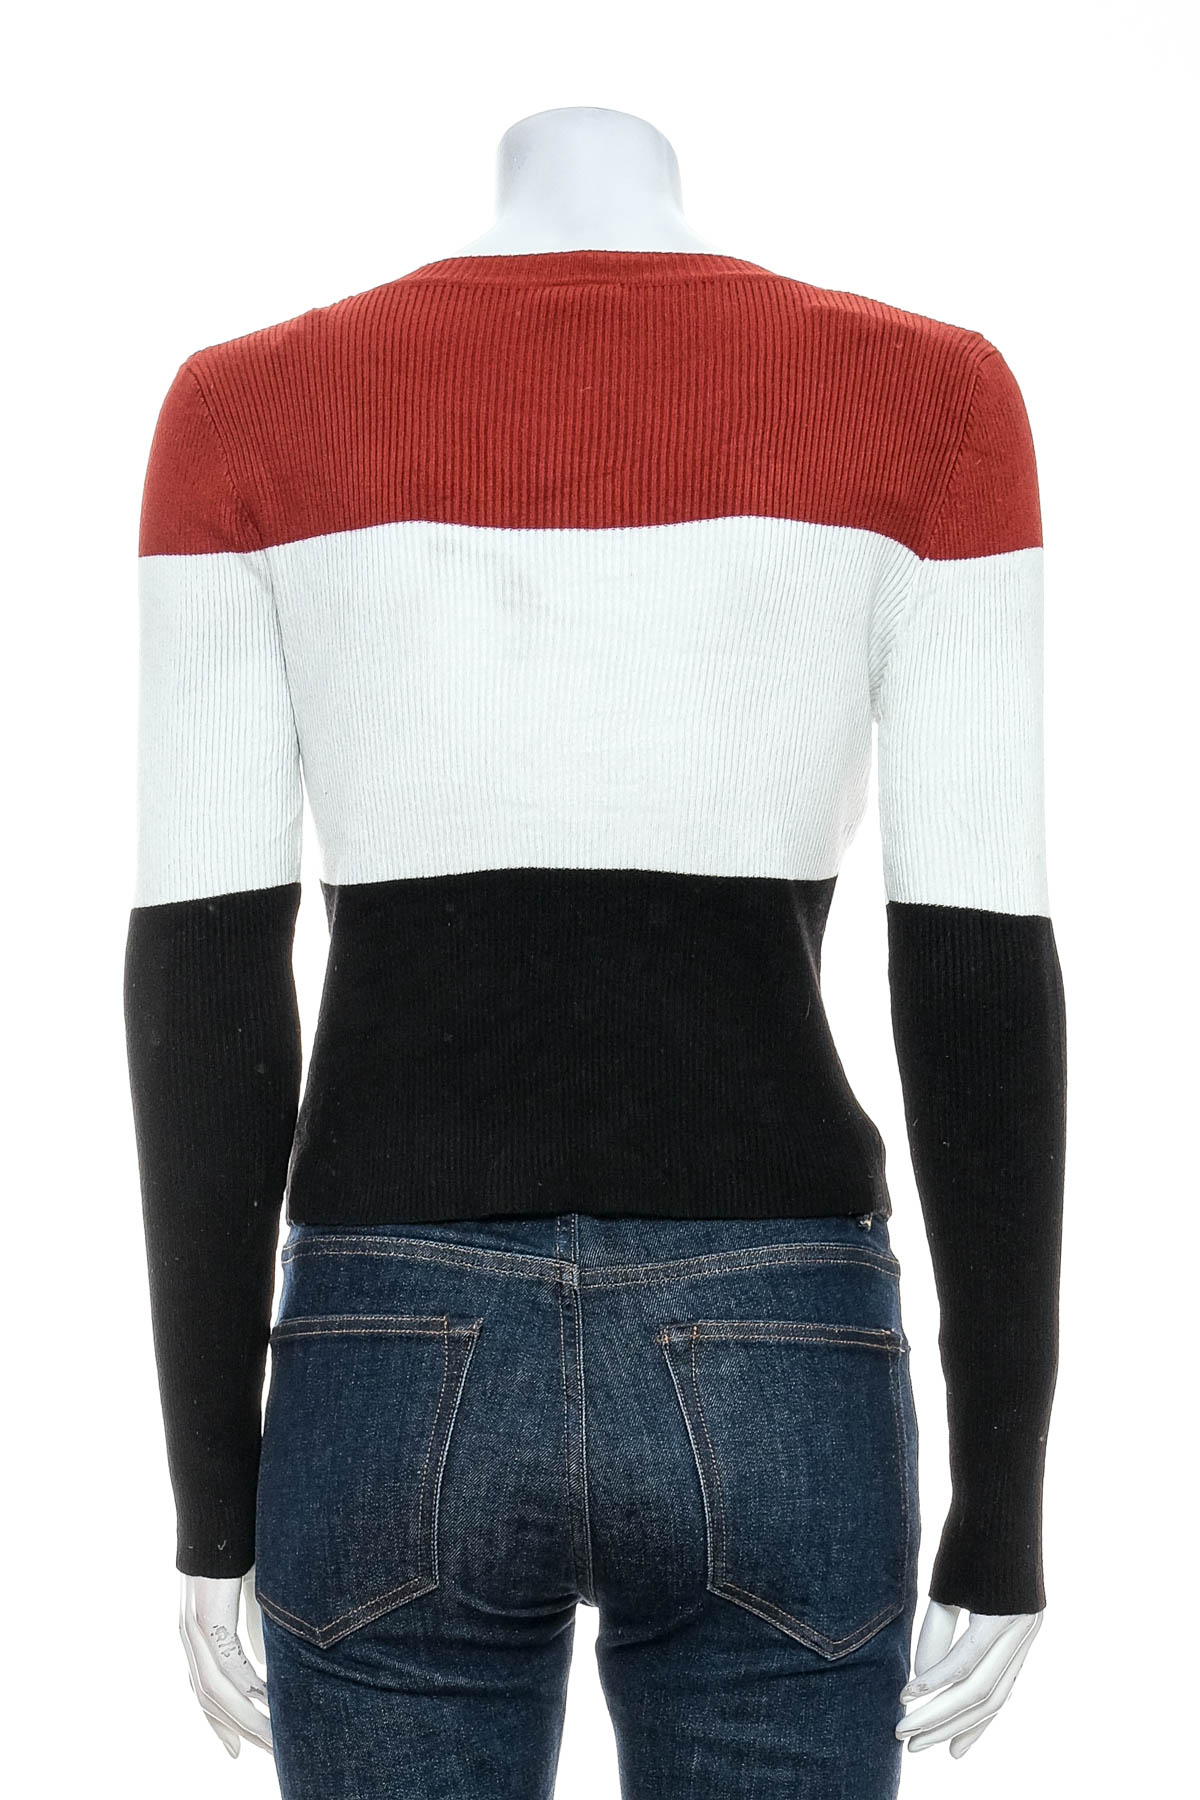 Women's sweater - The Slope - 1